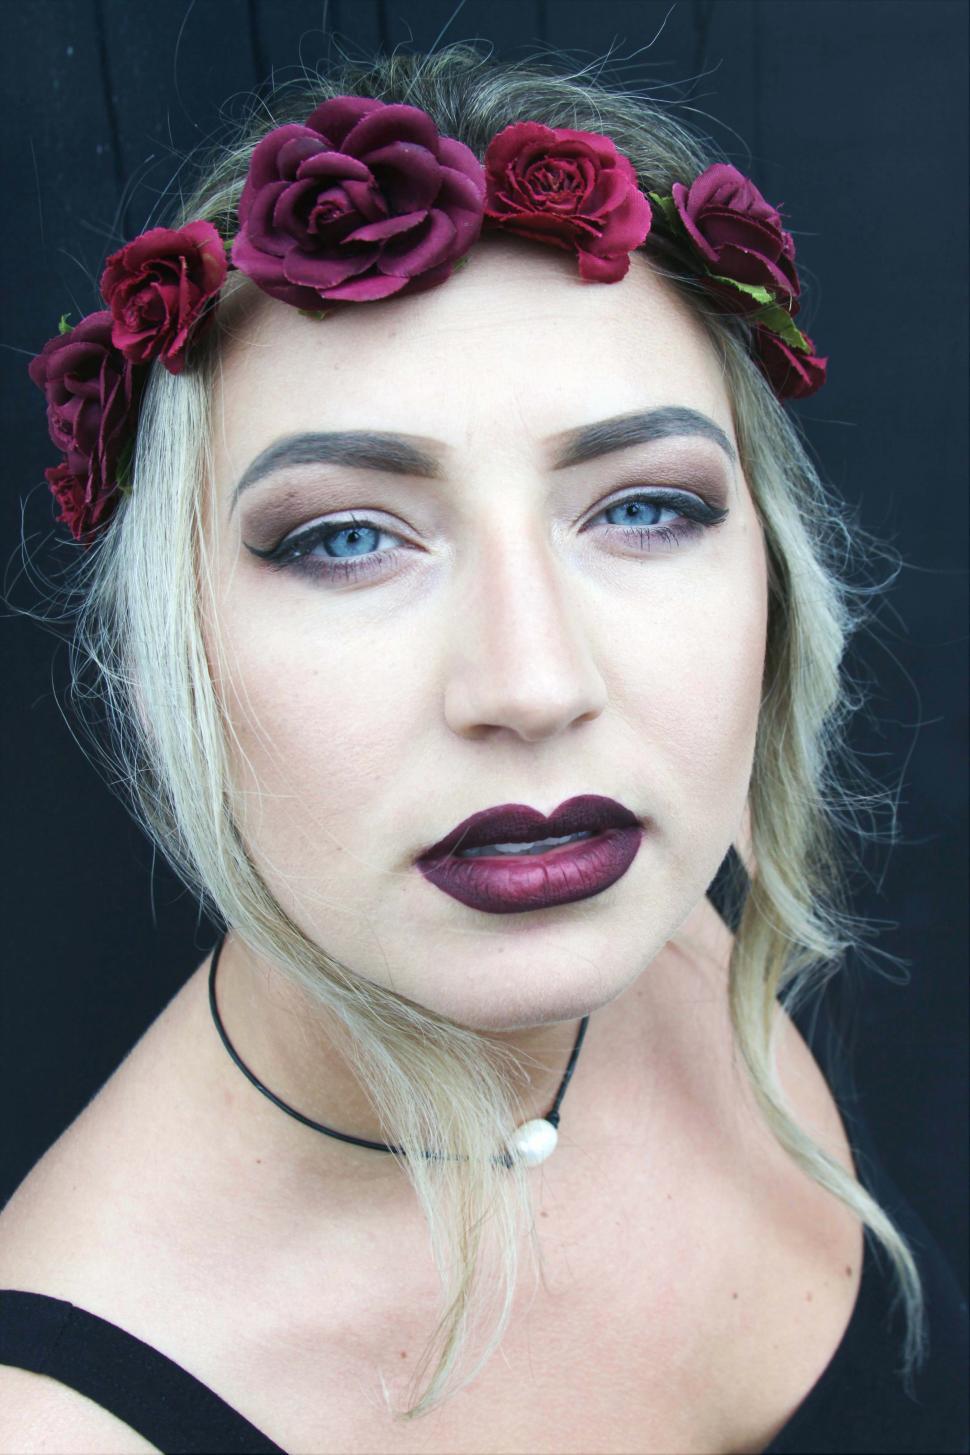 Free Image of Female fashion model with blonde hair and red rose headband, pos 